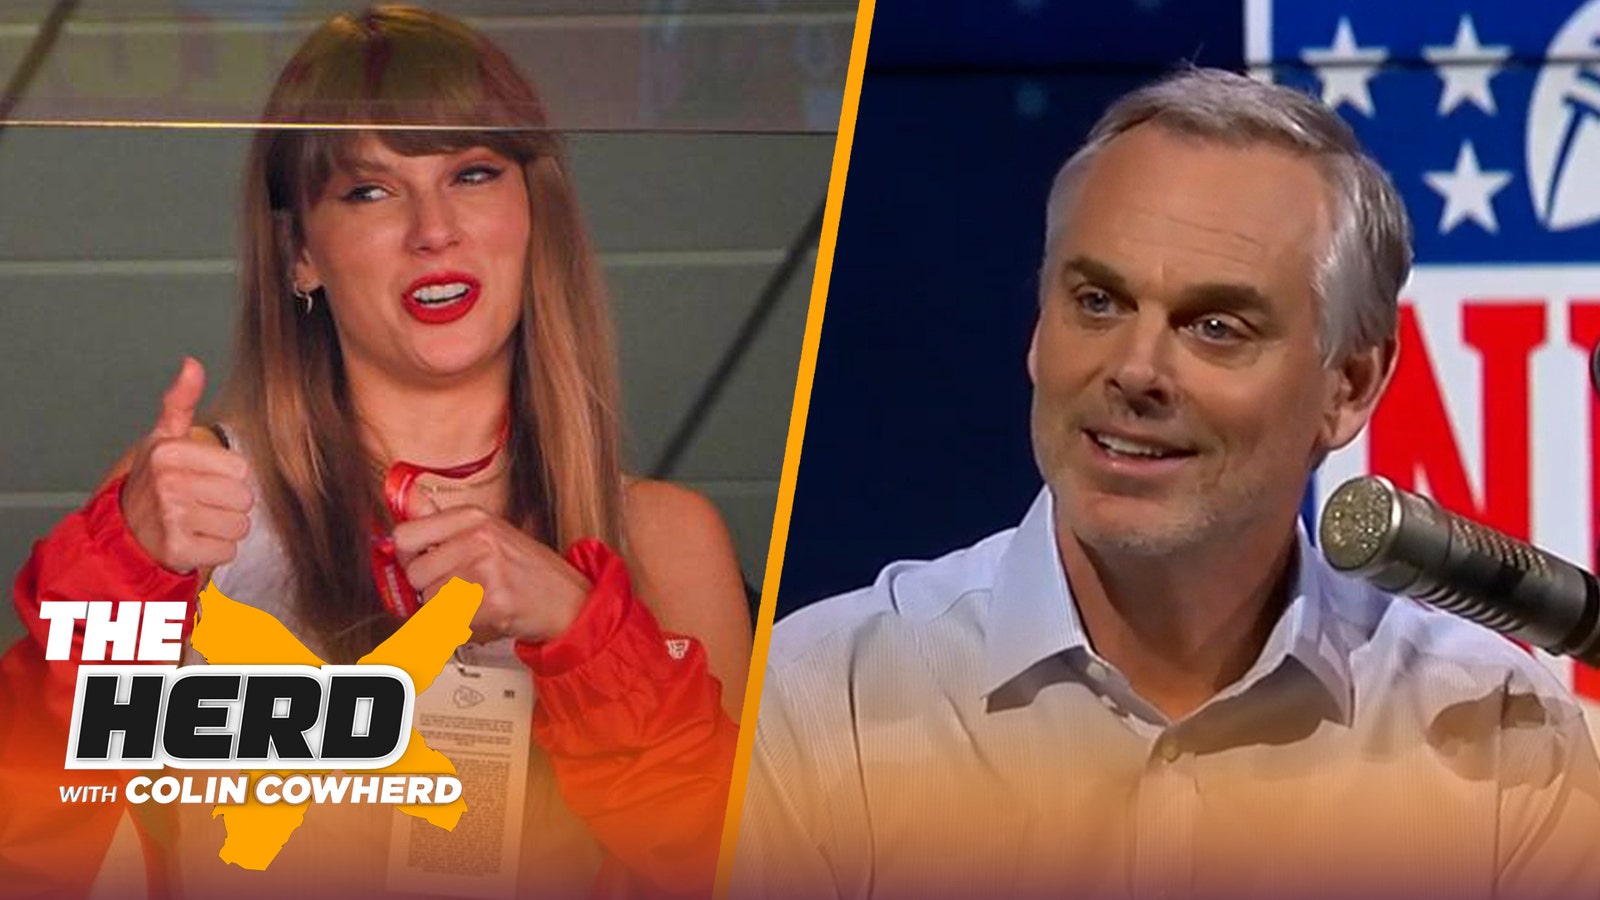 Colin Cowherd has no problem with Taylor Swift's presence in the NFL